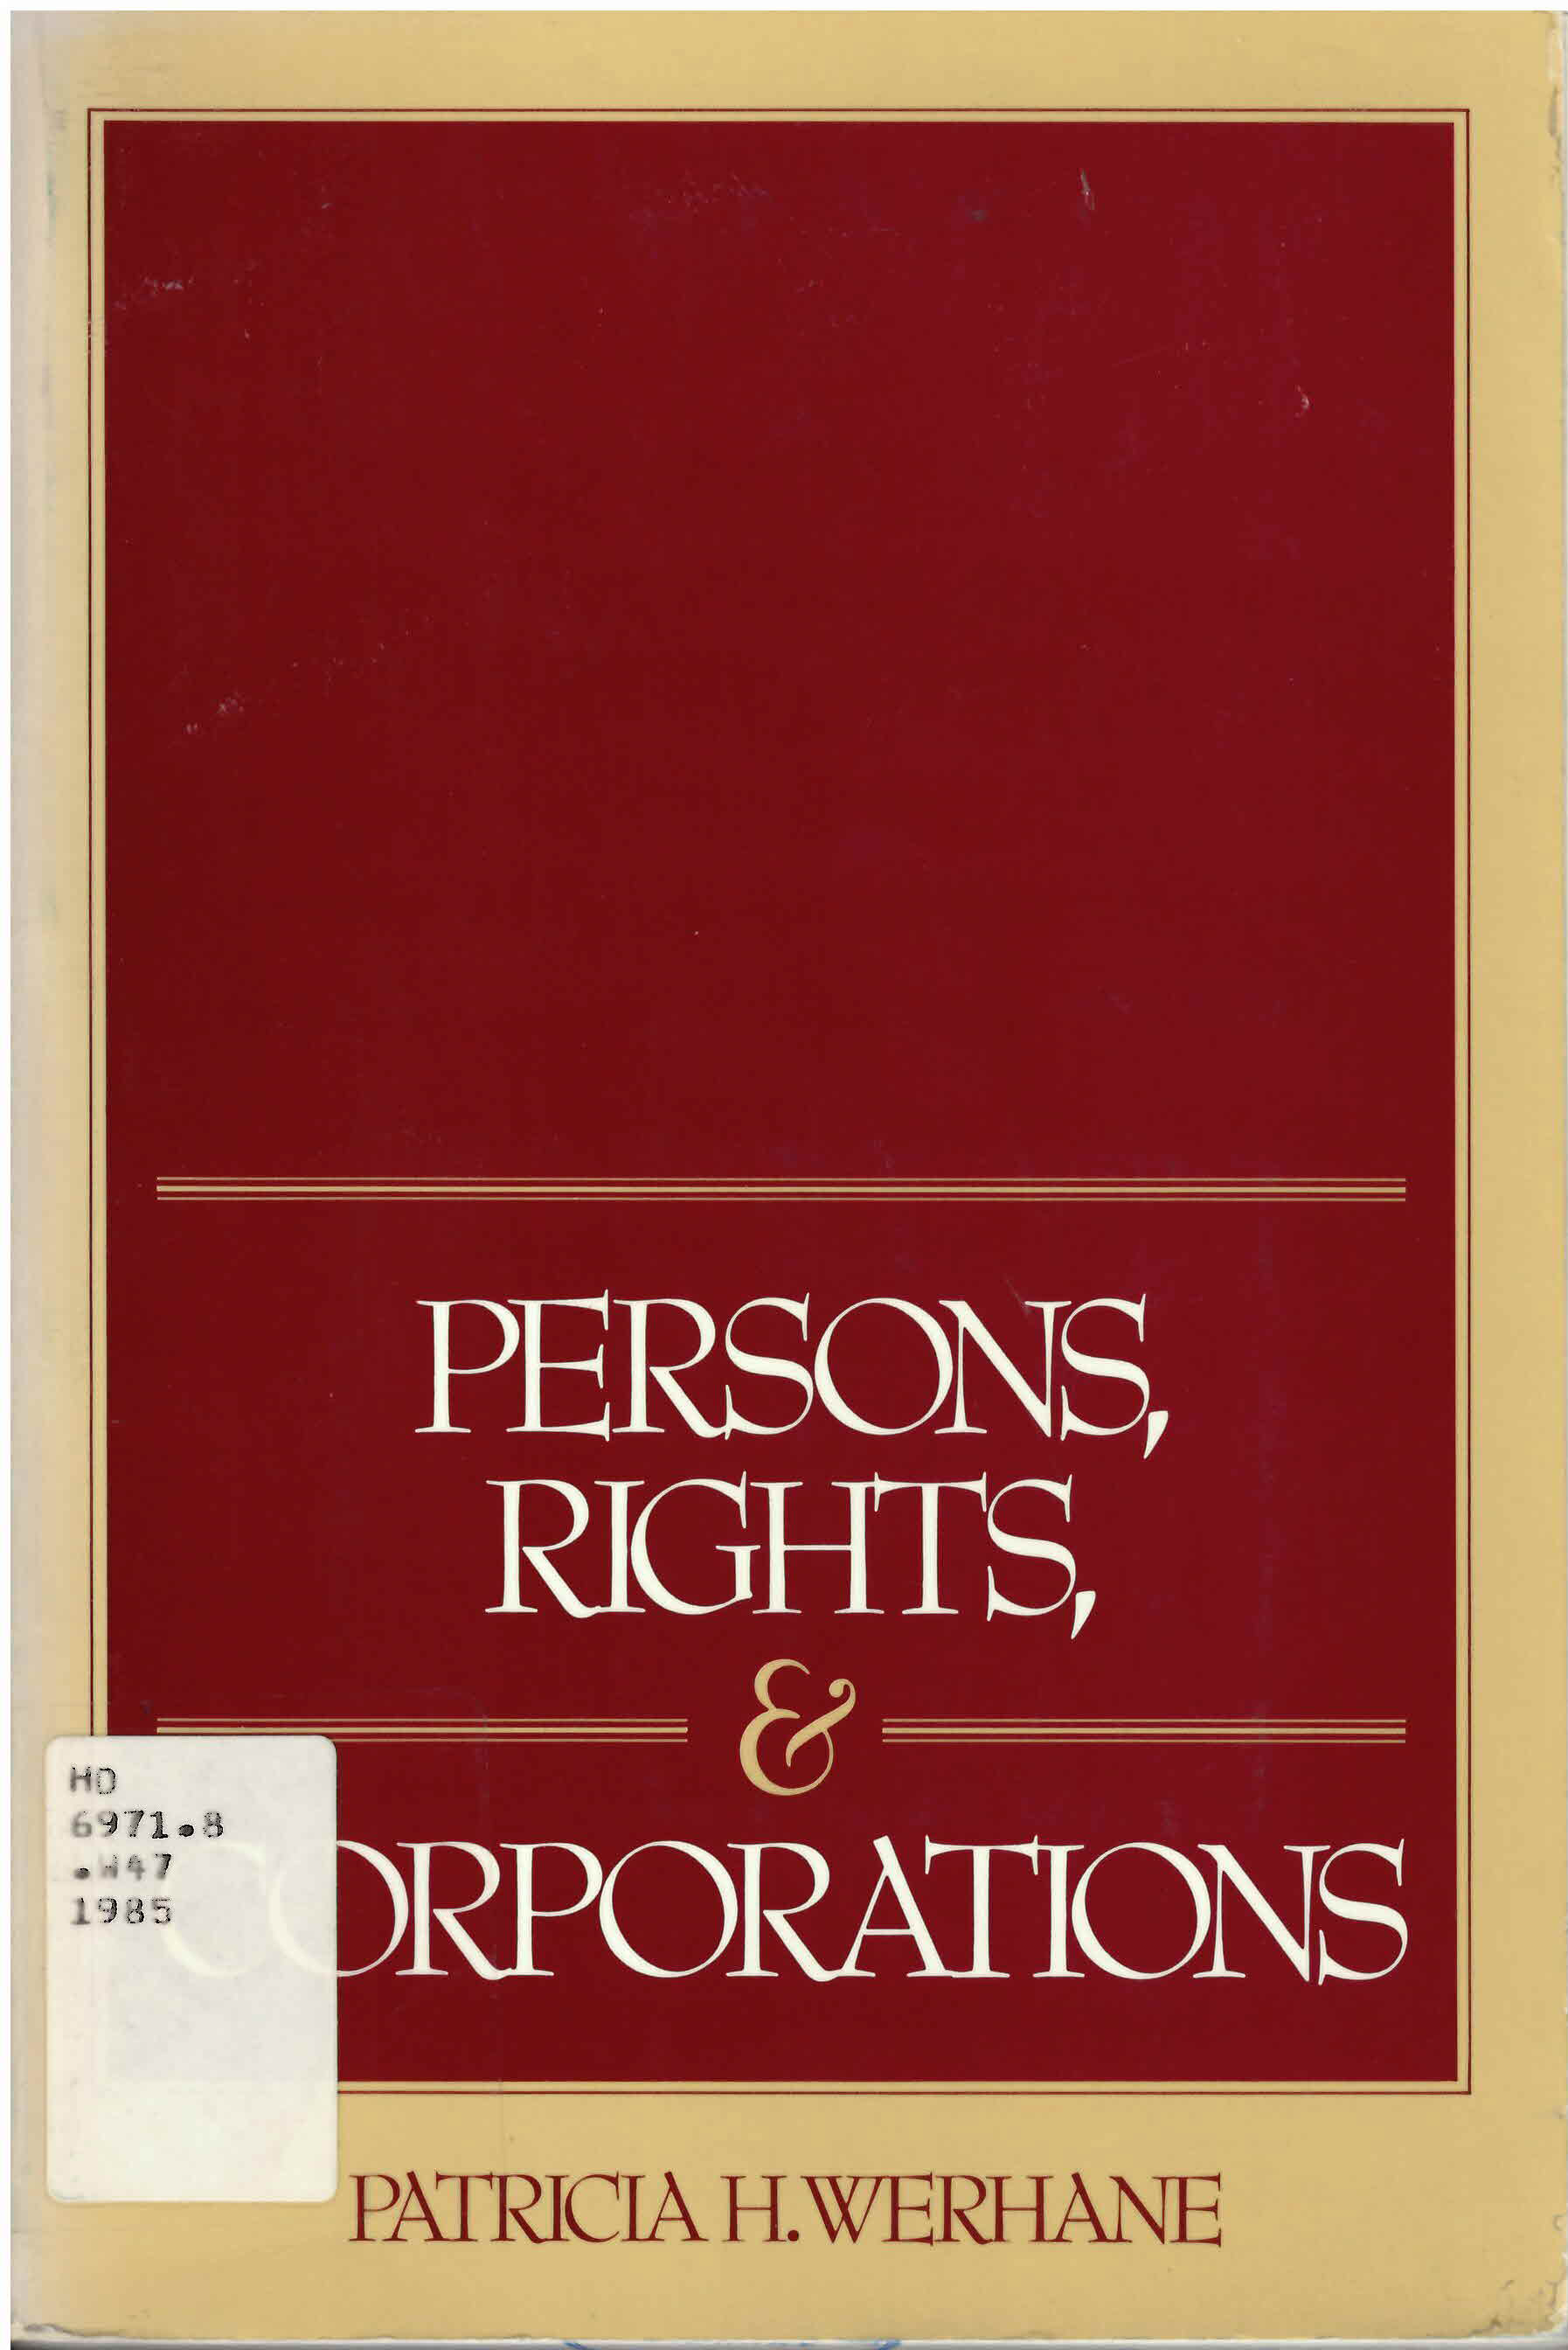 Persons, rights, and corporations